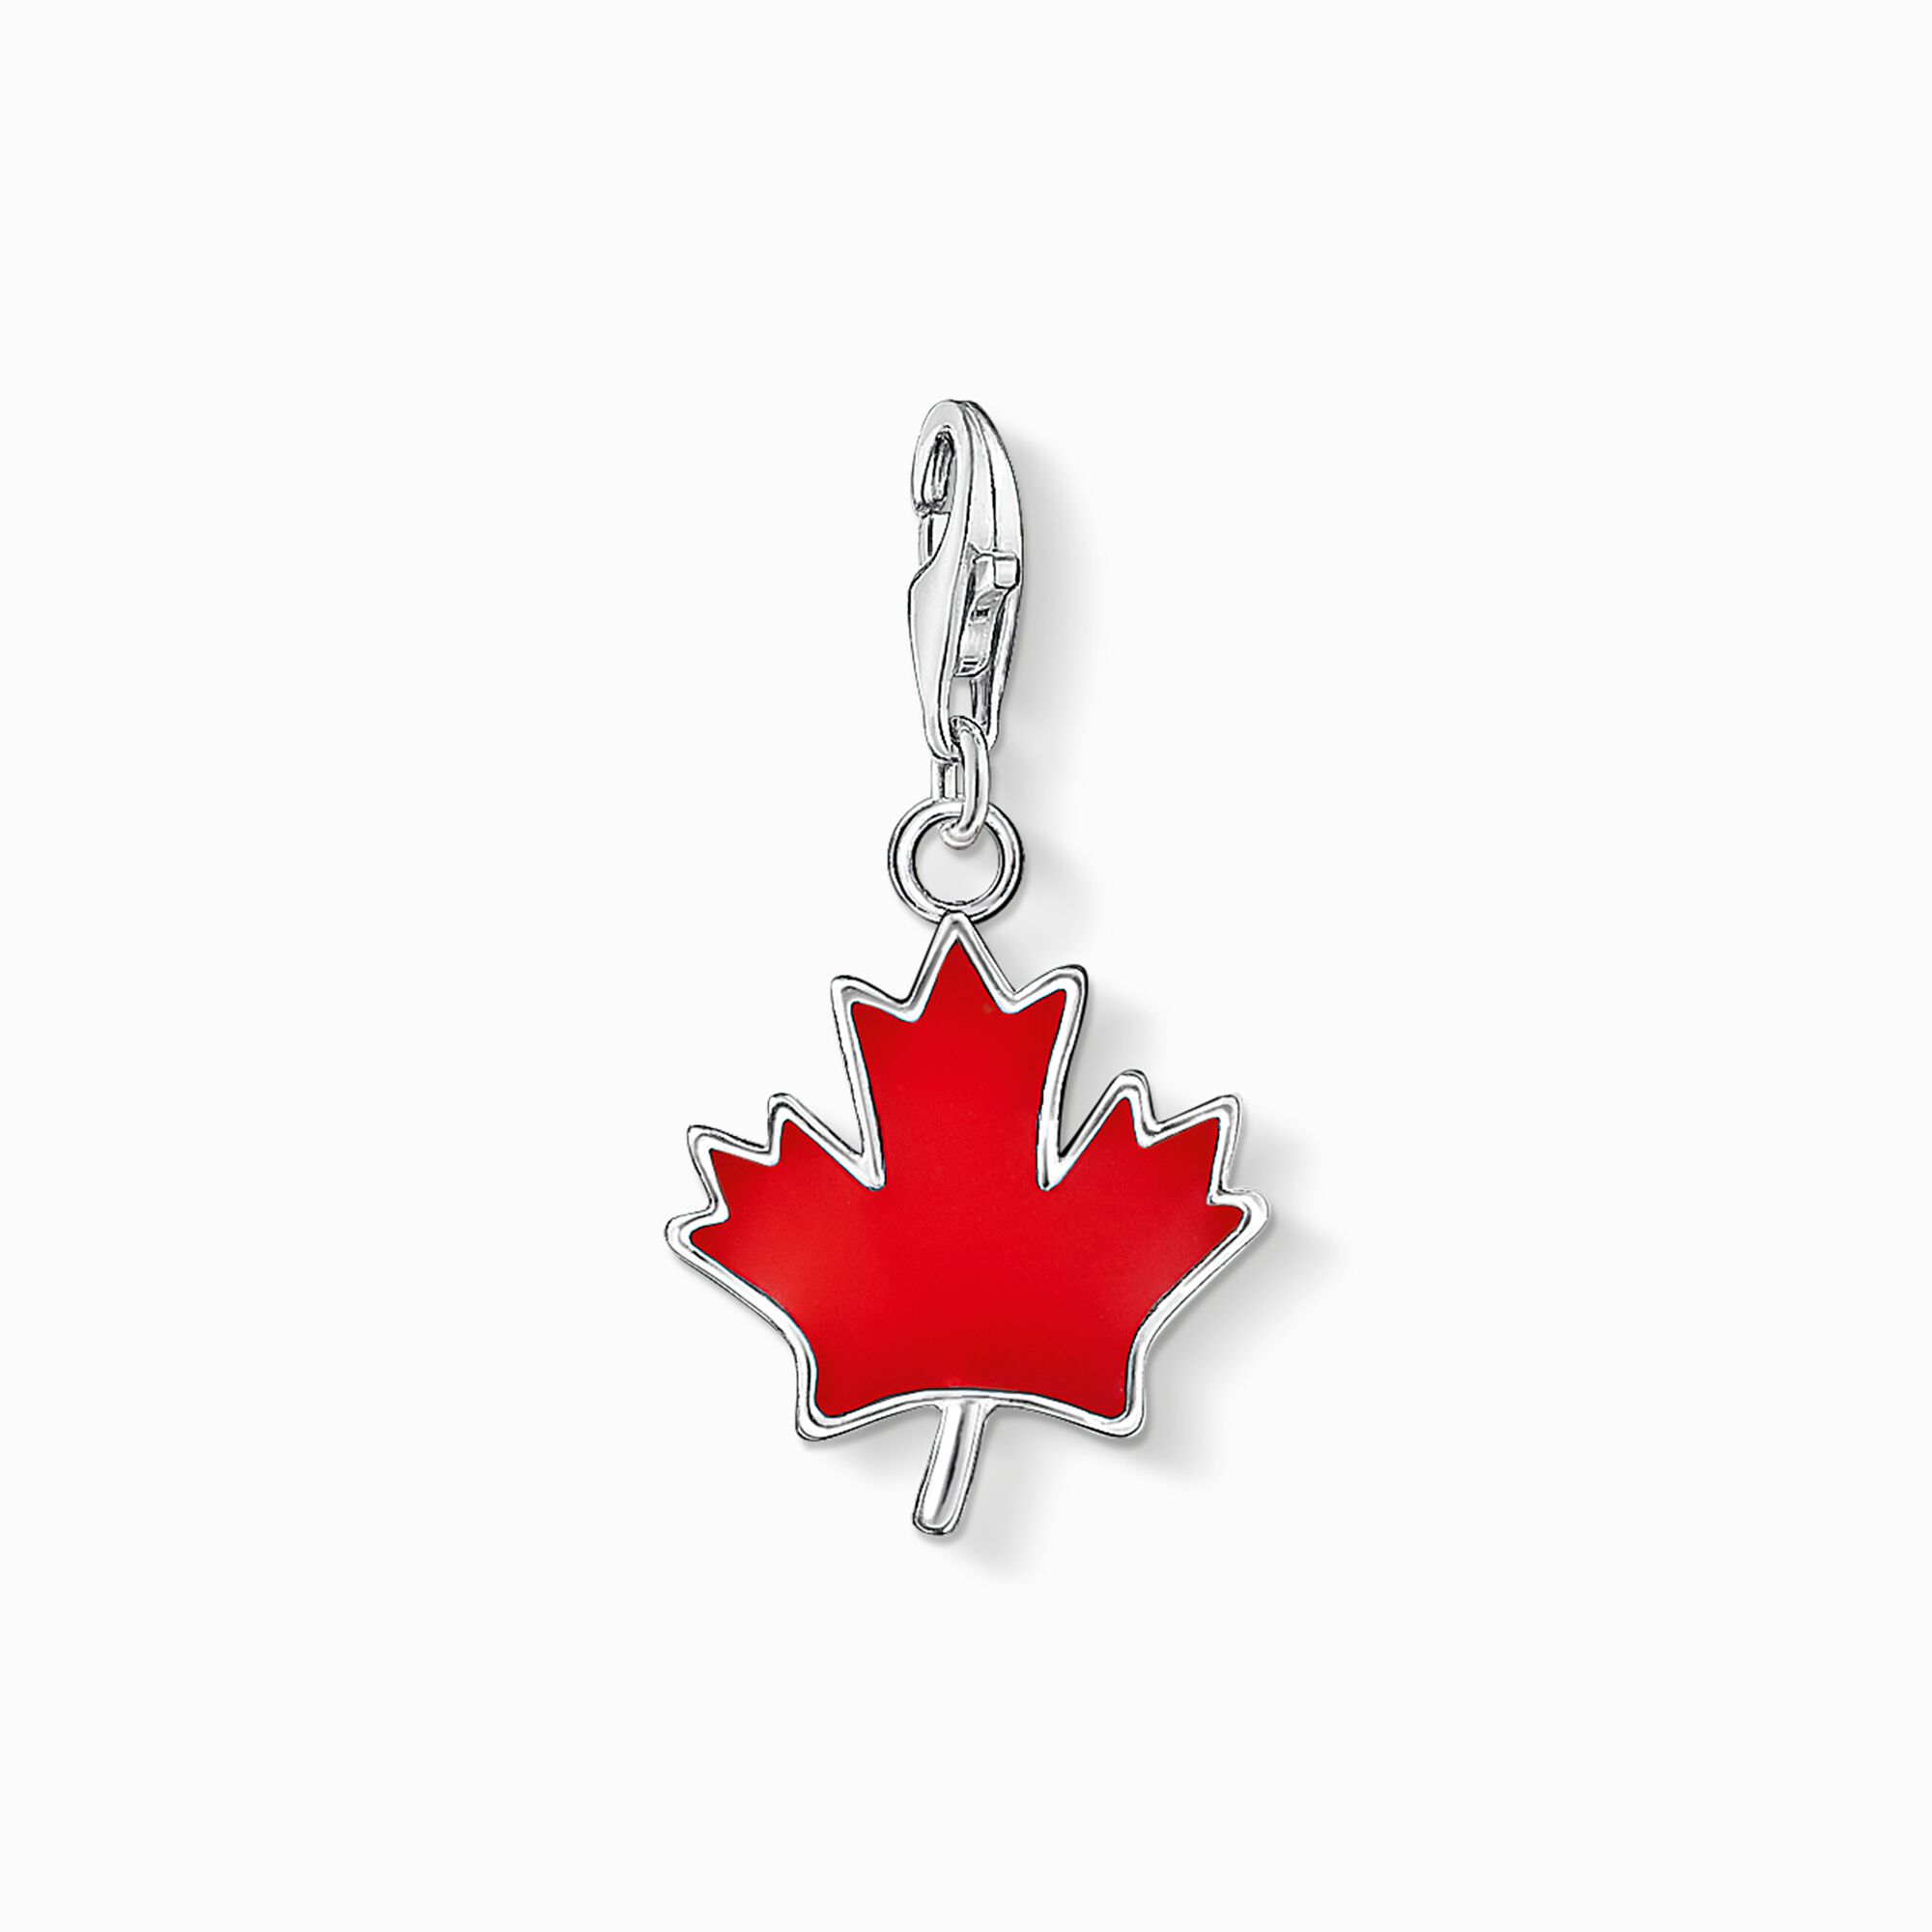 Charm pendant maple leaf from the Charm Club collection in the THOMAS SABO online store